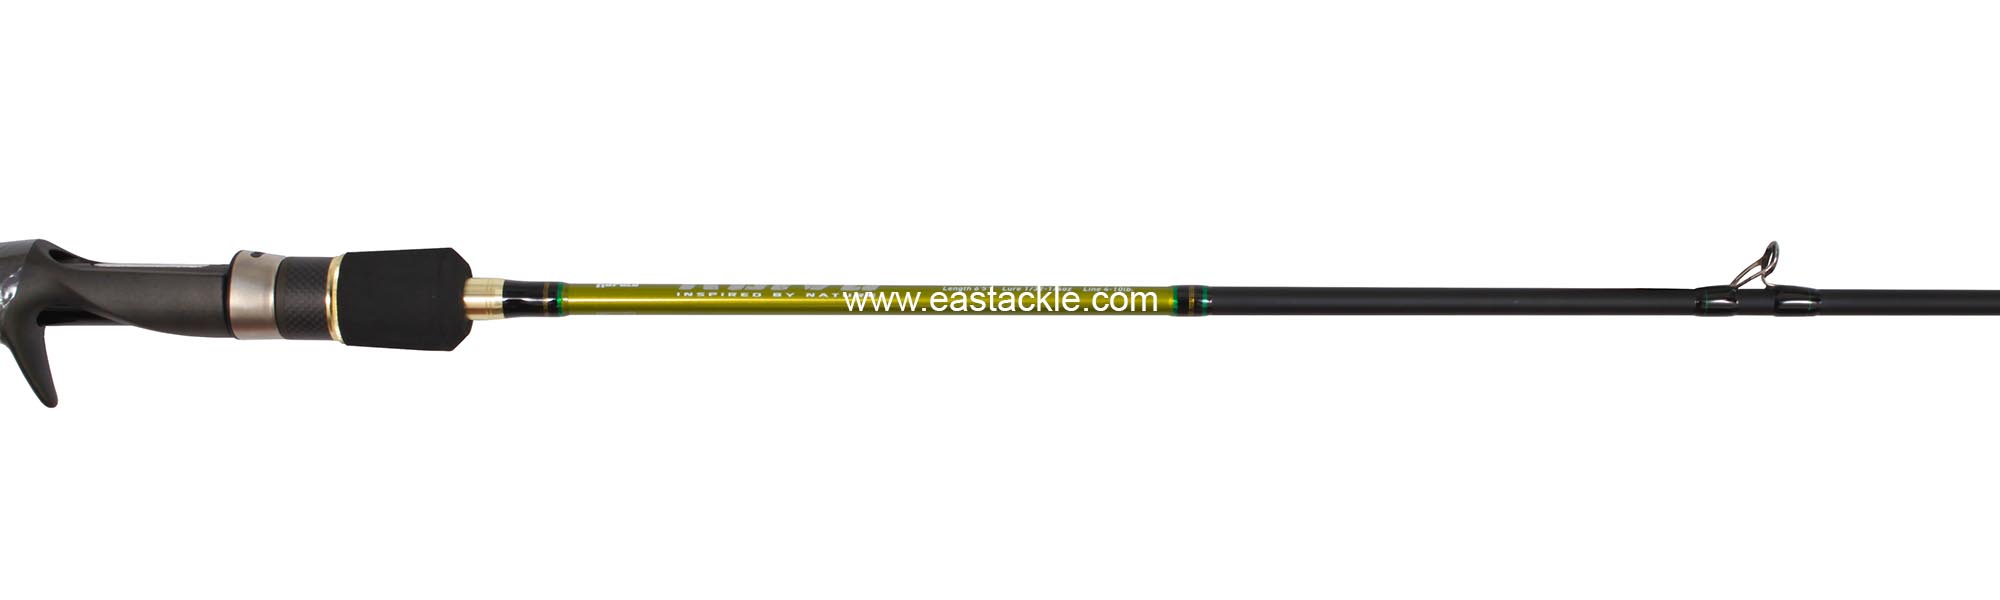 Rapala - Koivu - KVC651ML - Bait Casting Rod - Reel Seat Fore Grip to Stripper Guide (Side View) | Eastackle